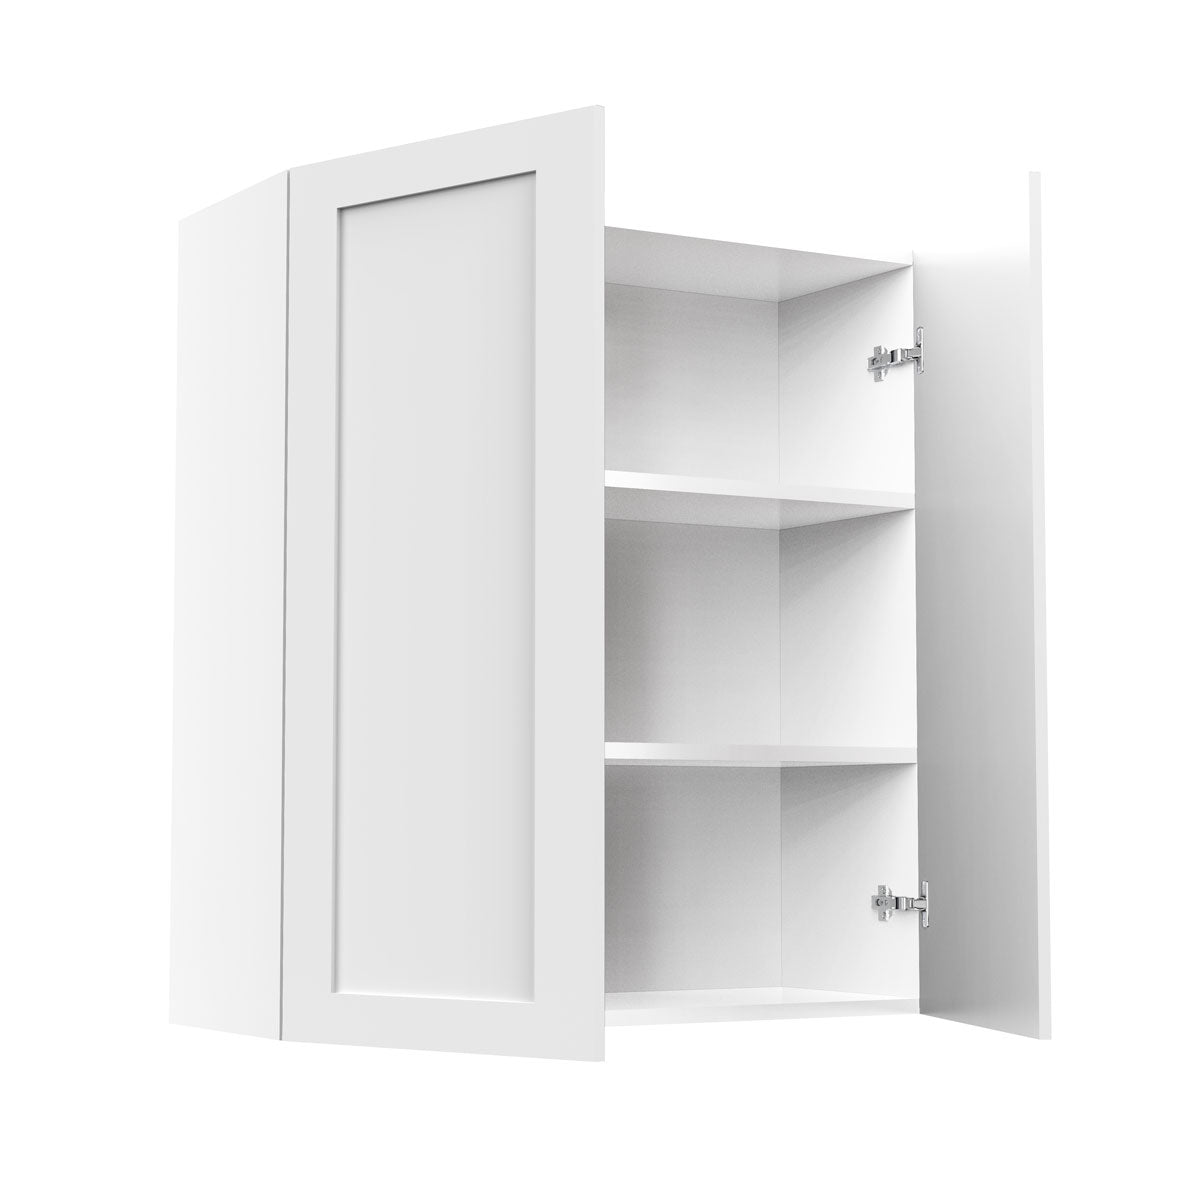 RTA - White Shaker - Double Door Wall Cabinets | 33"W x 36"H x 12"D